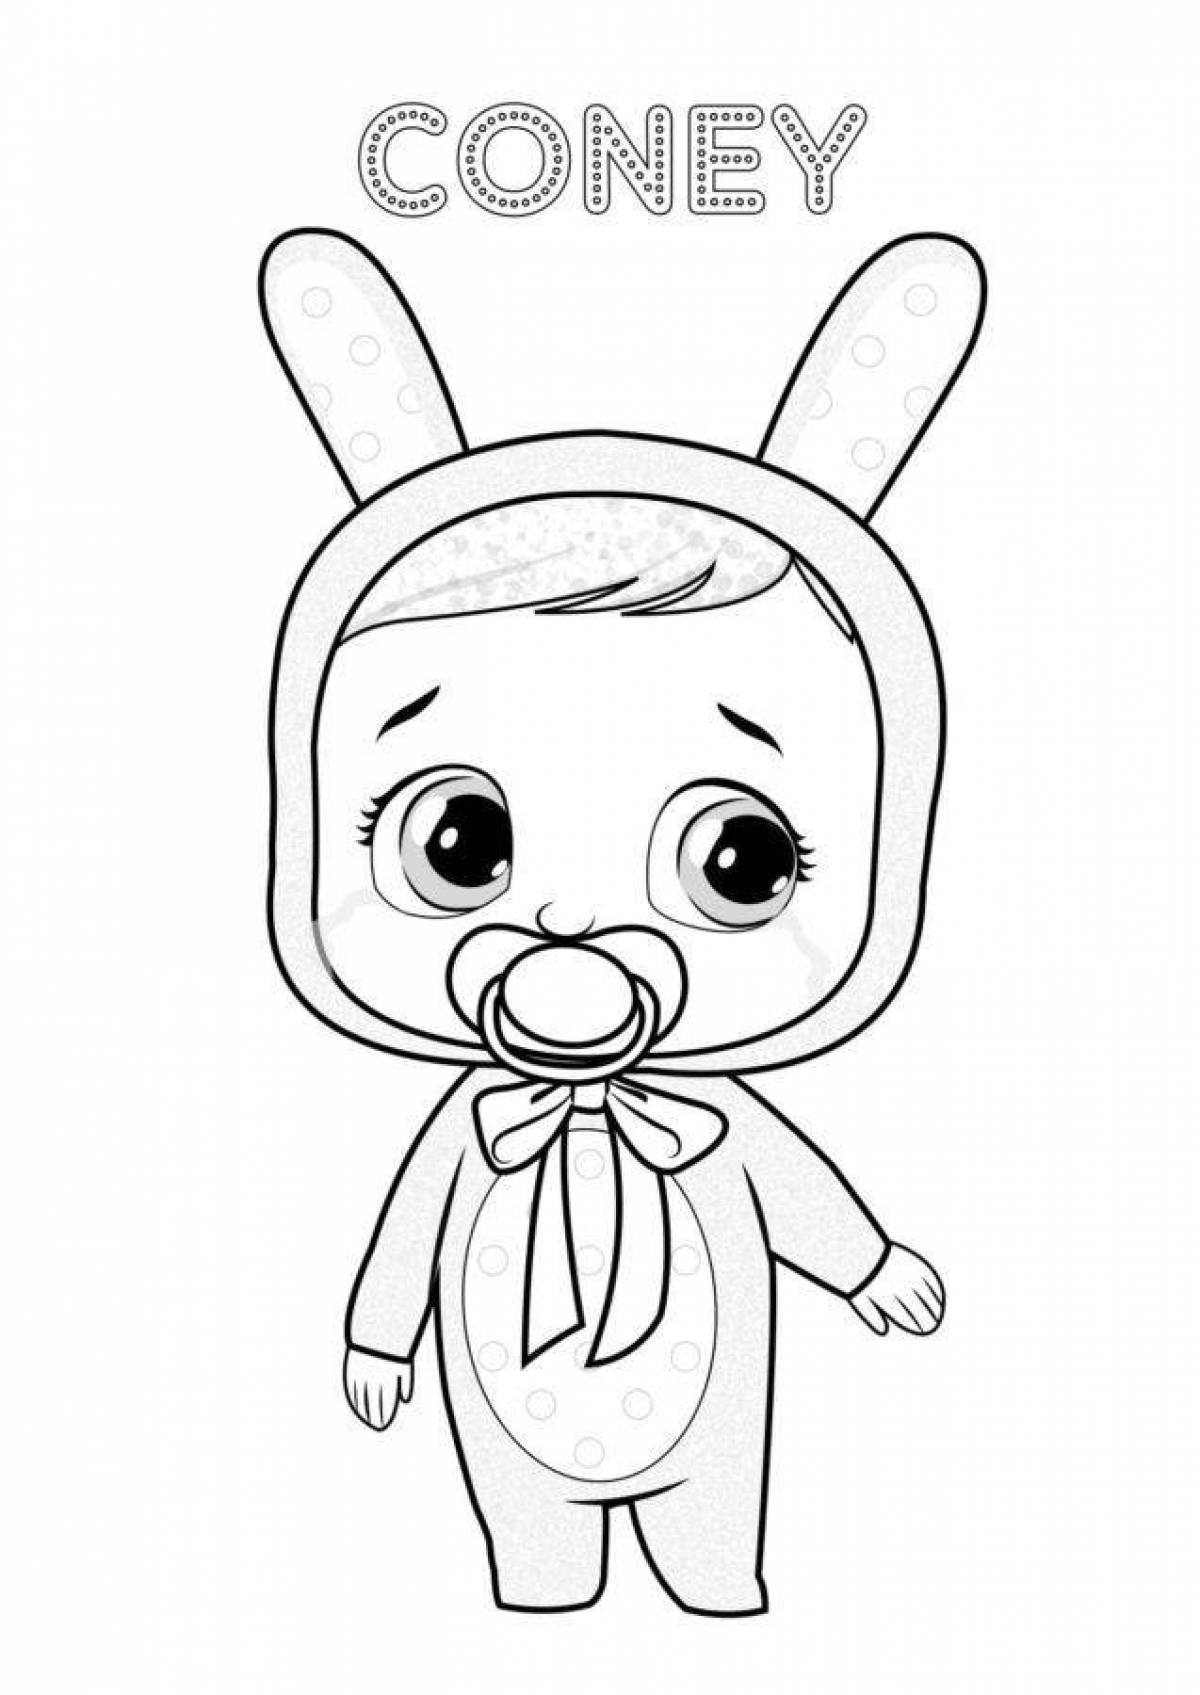 Adorable crybaby coloring pages